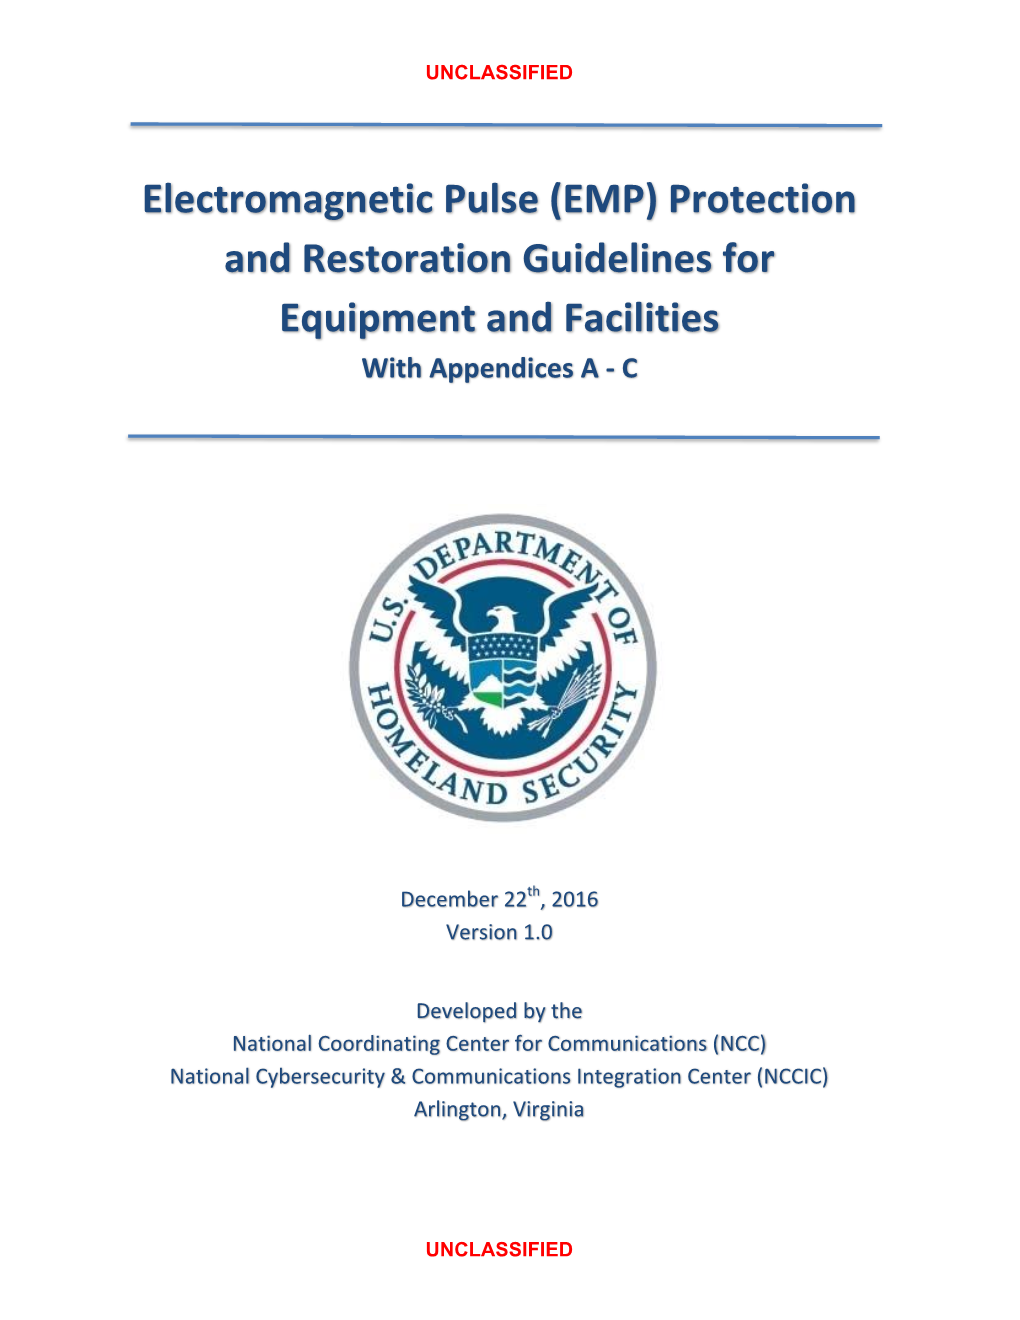 Electromagnetic Pulse (EMP) Protection and Restoration Guidelines for Equipment and Facilities with Appendices a - C